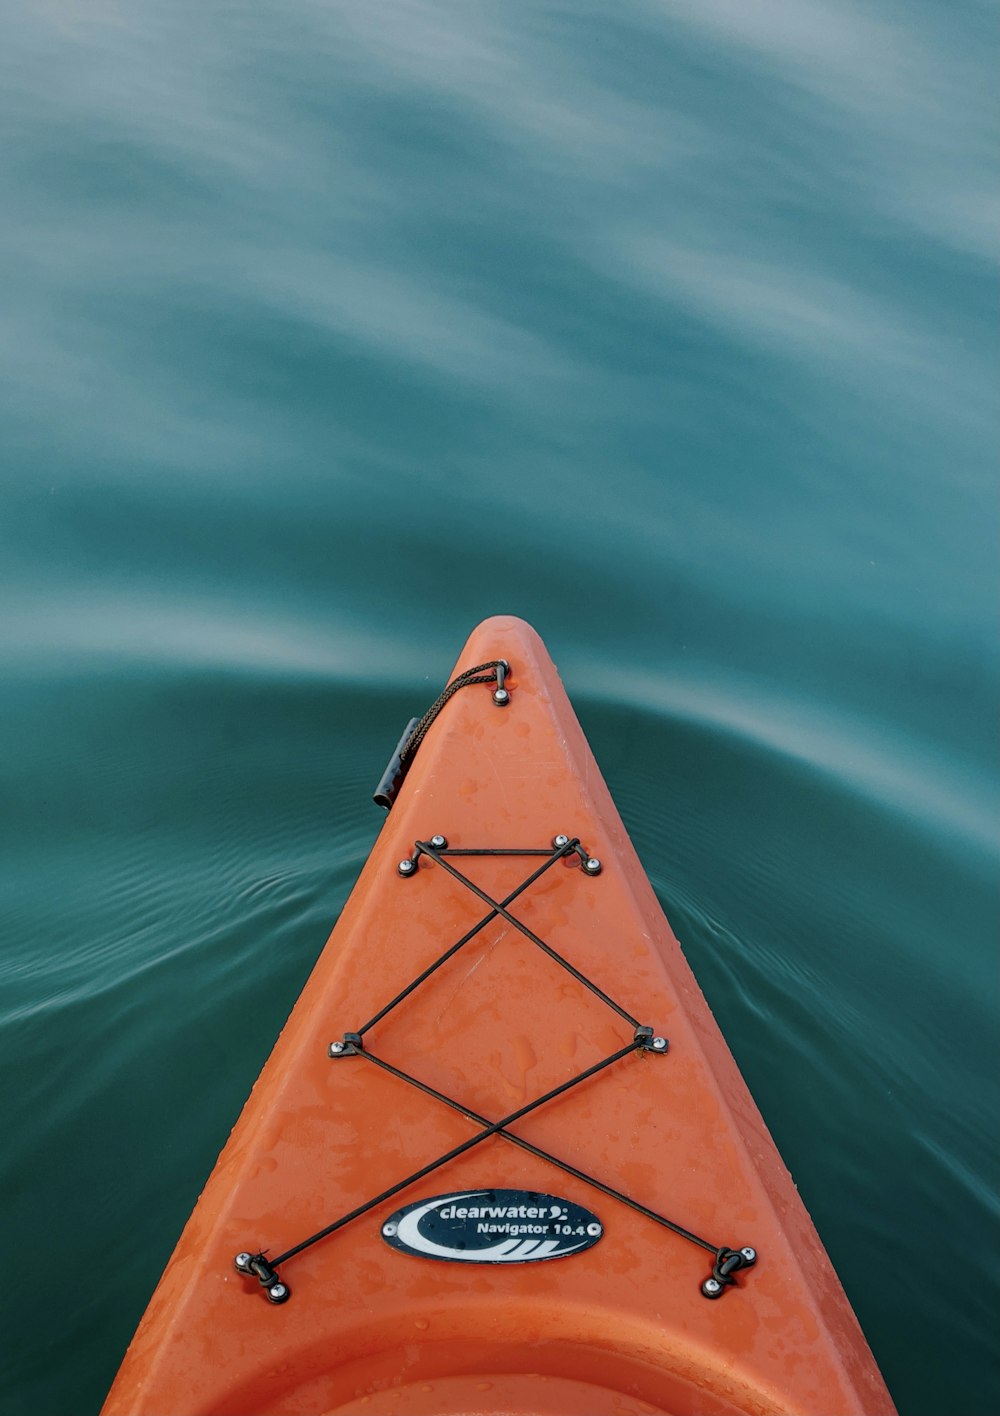 Brown boat on green water photo – Free Wallpapers Image on Unsplash